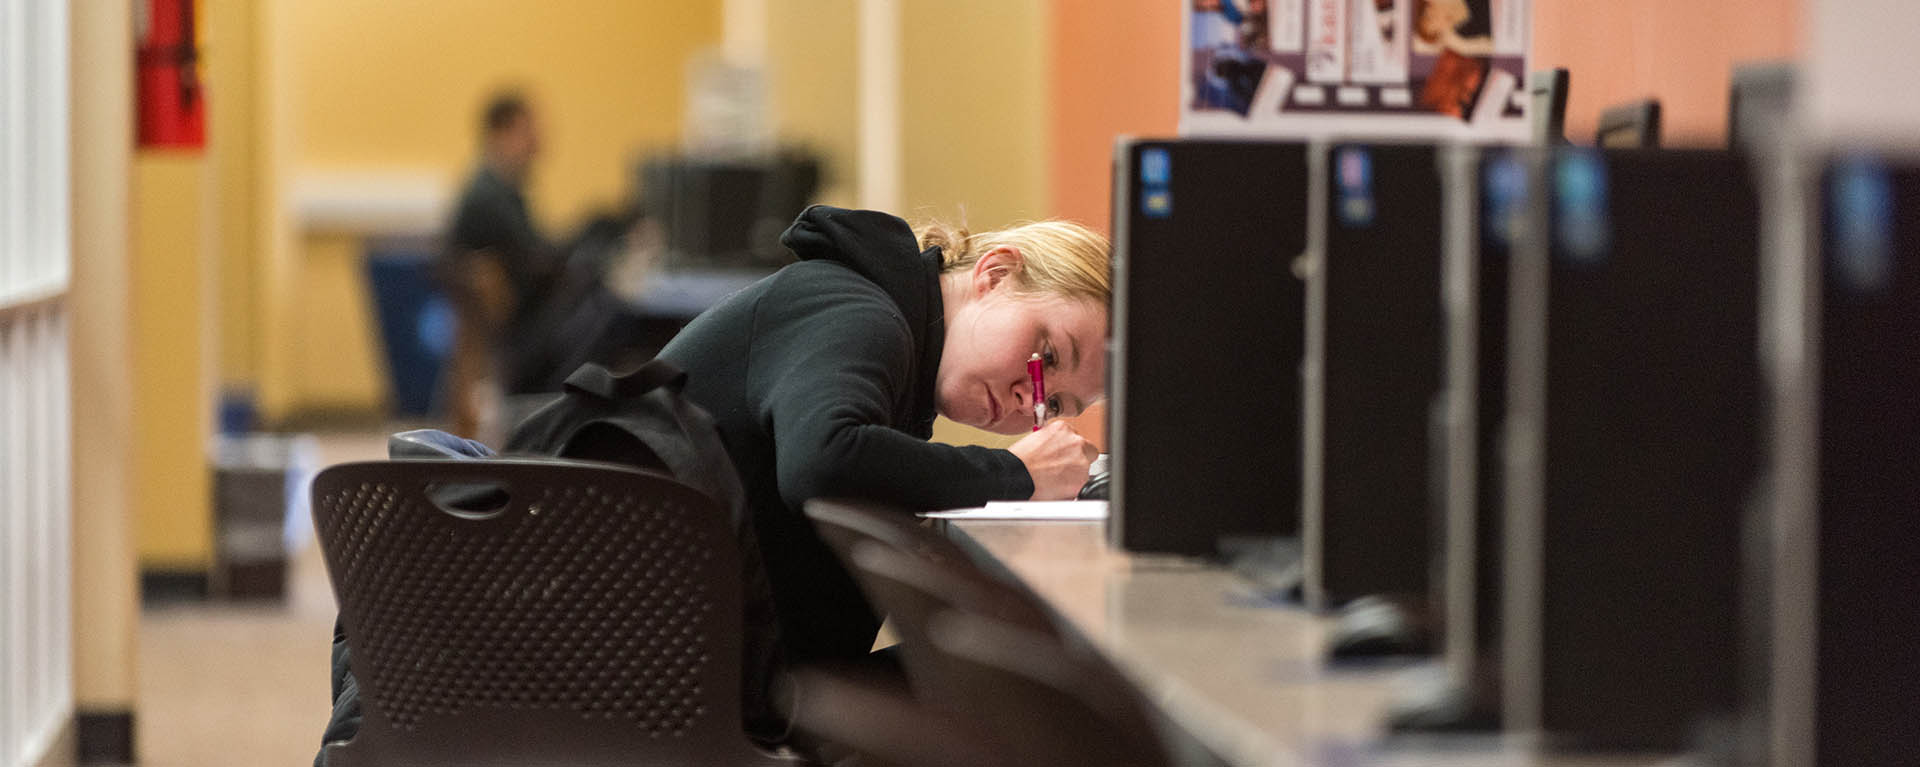 A student takes notes while at a computer in the library